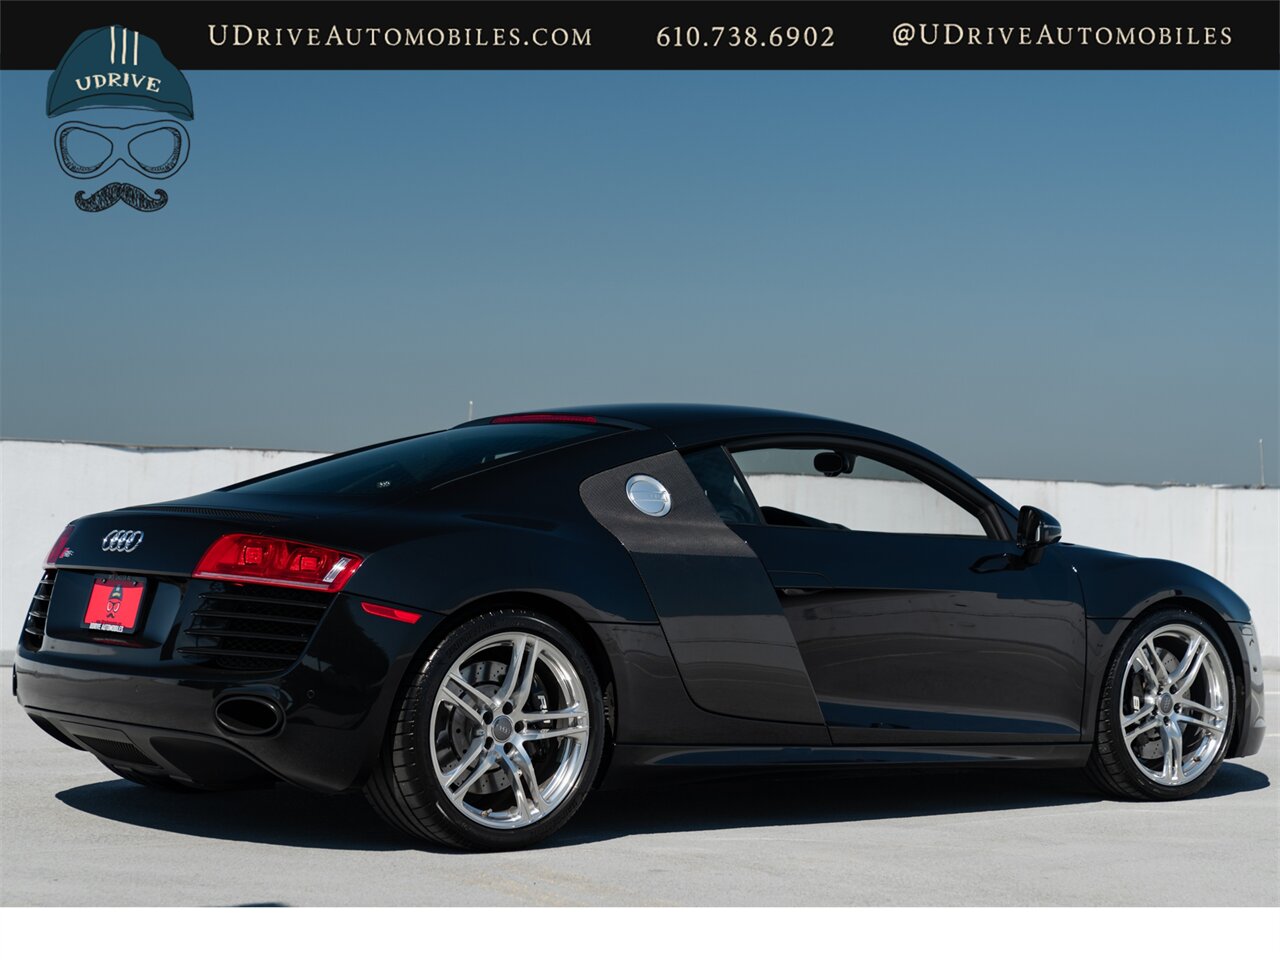 2009 Audi R8 Quattro  4.2L V8 6 Speed Manual - Photo 19 - West Chester, PA 19382